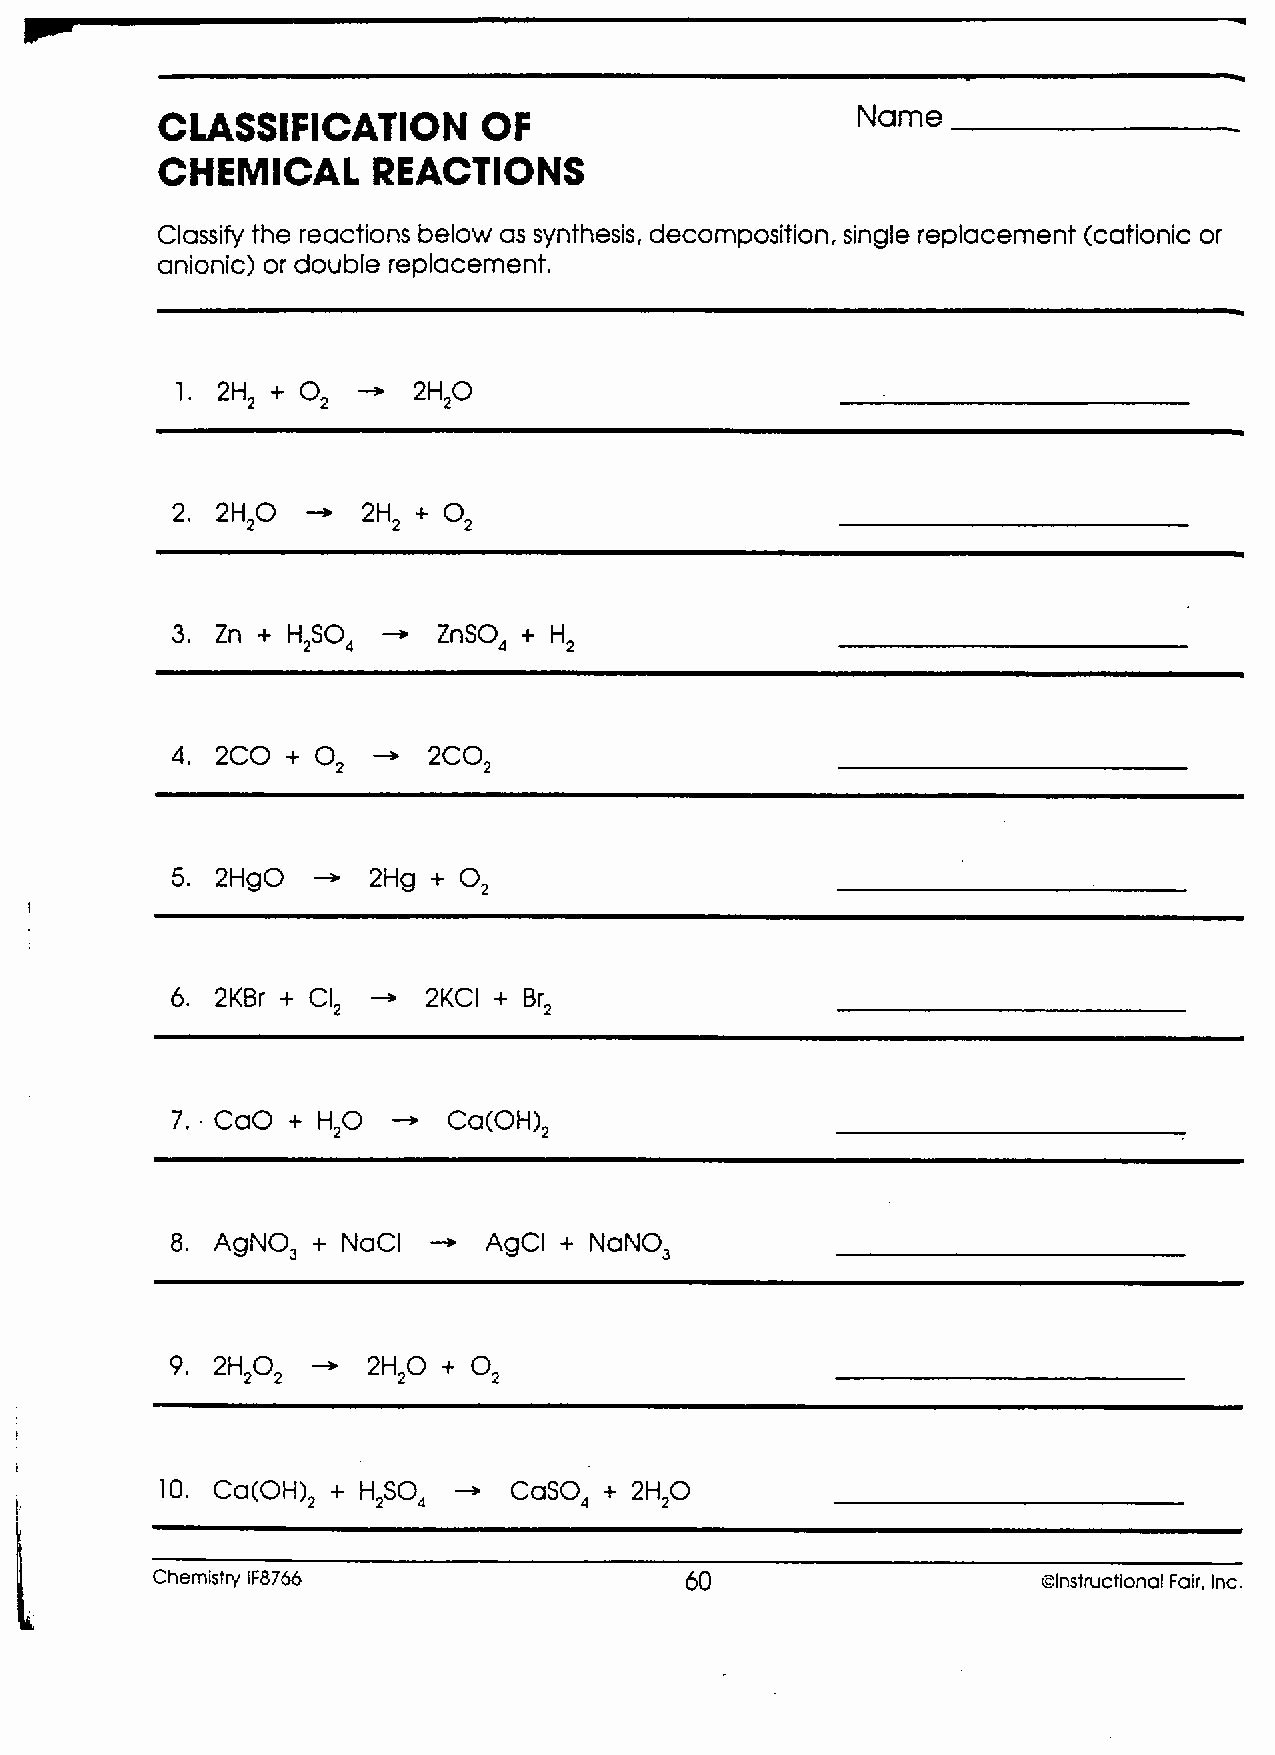 Classification Of Chemical Reactions Worksheet New Chemistry Ia Mr Phelps Big Rapids Hs